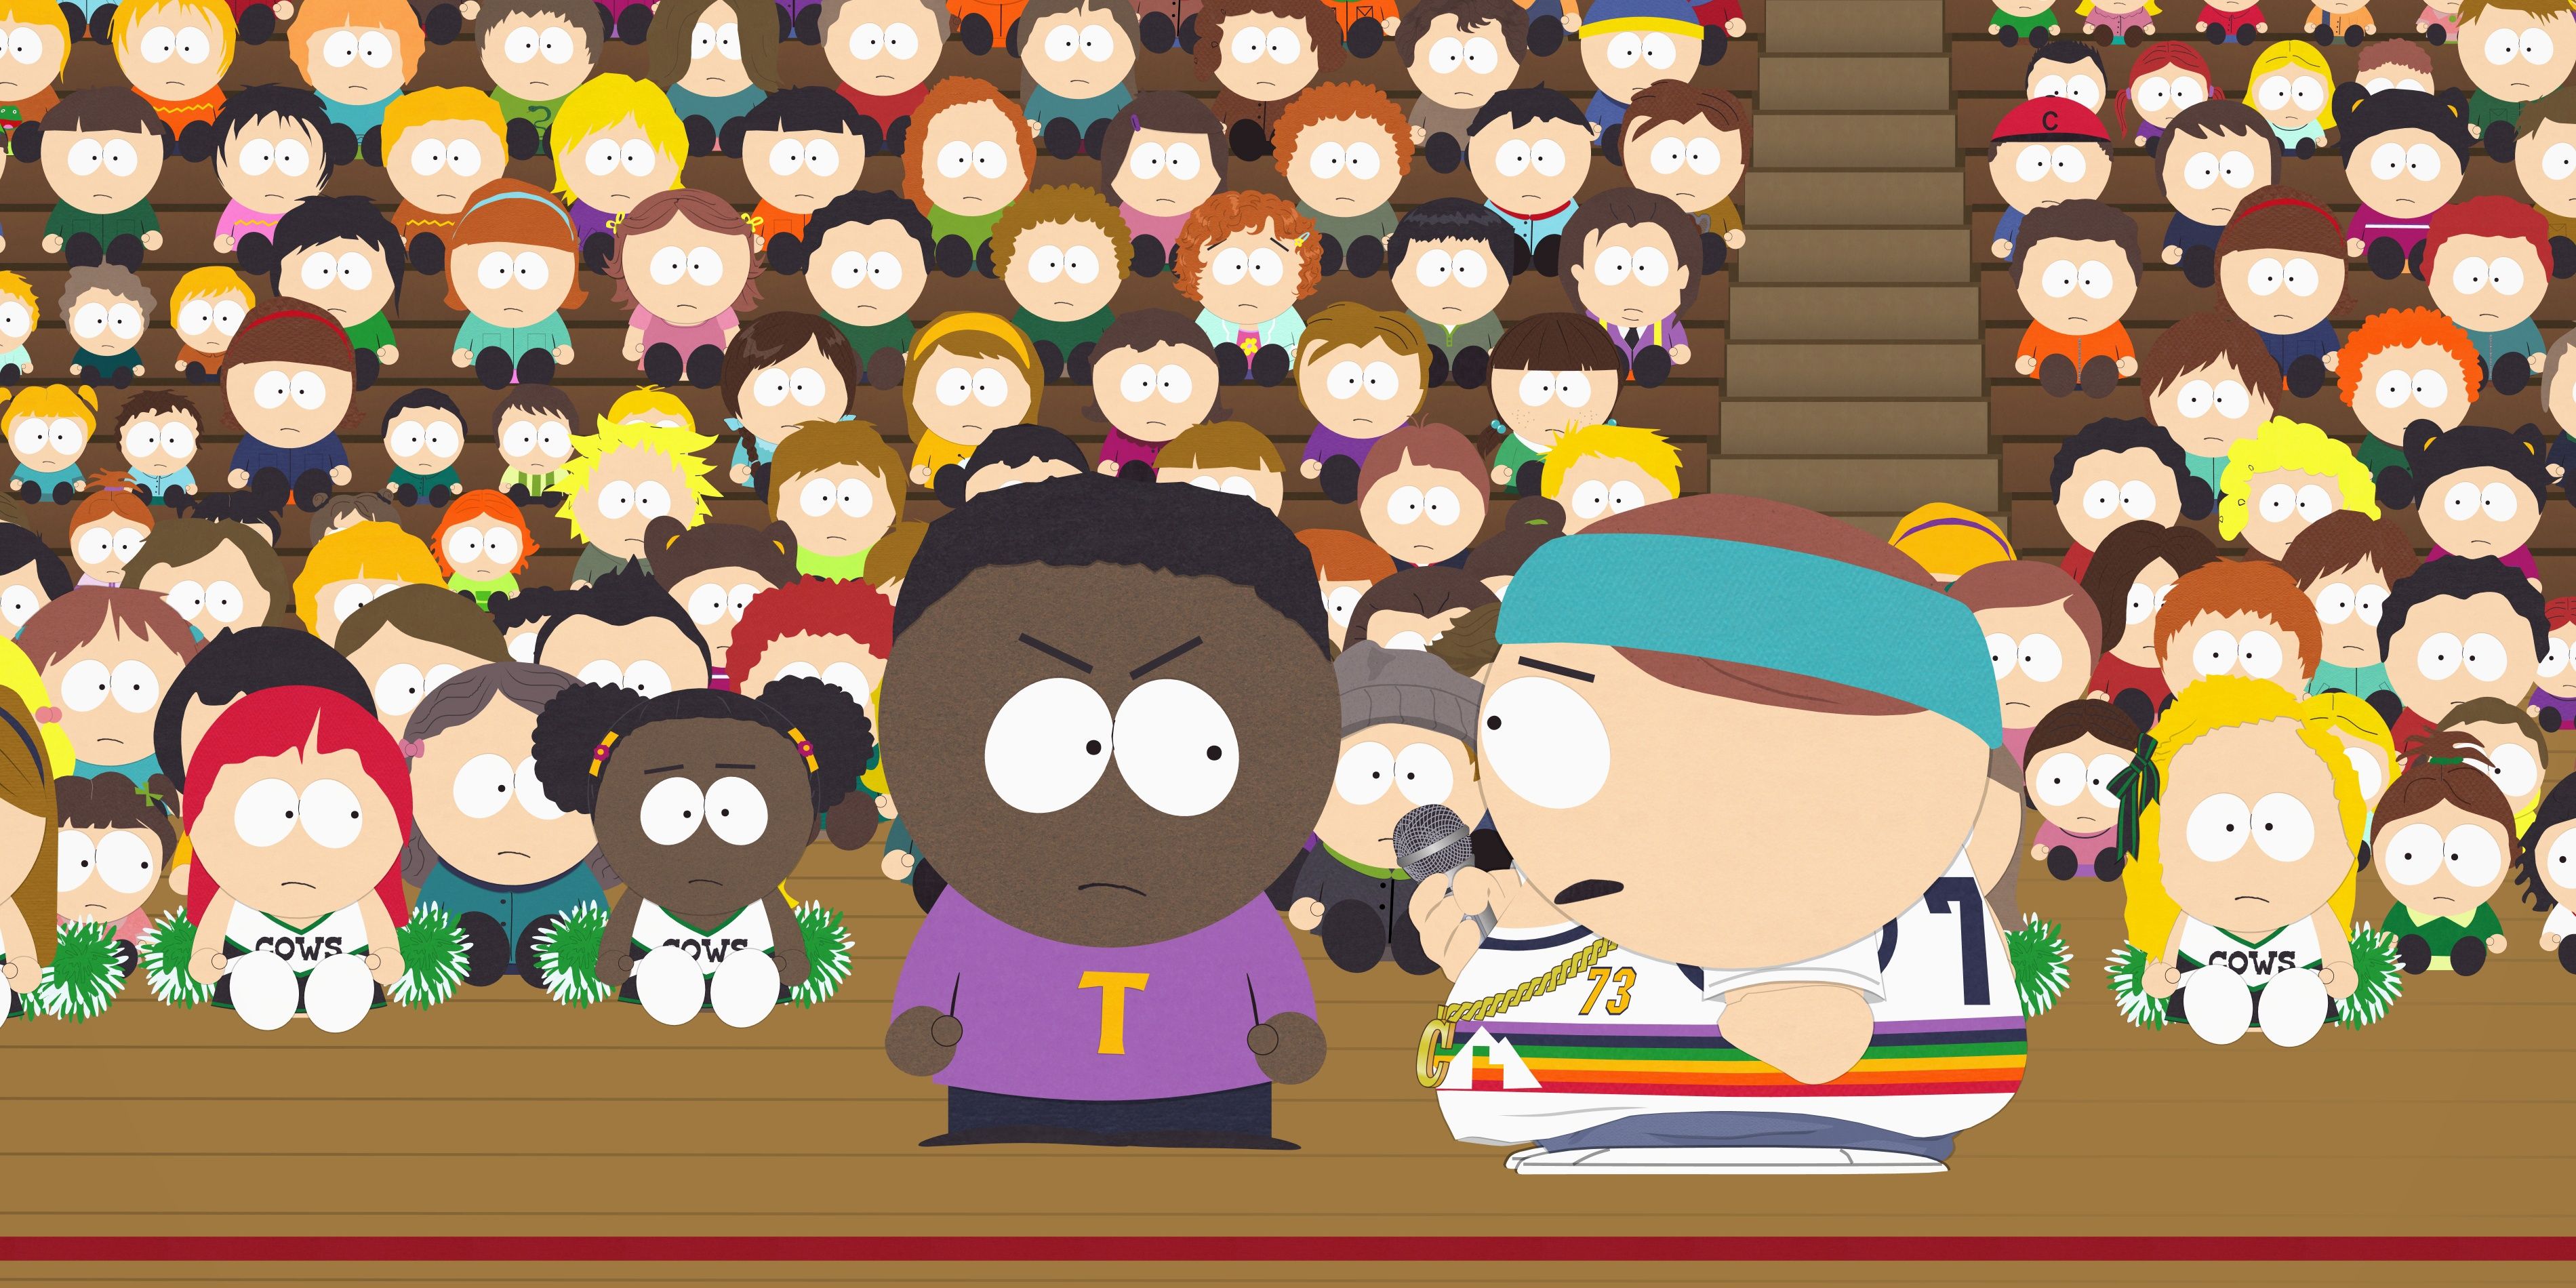 Cartman and Tolkien fight in the gym in South Park episode, "World War Zimmerman"